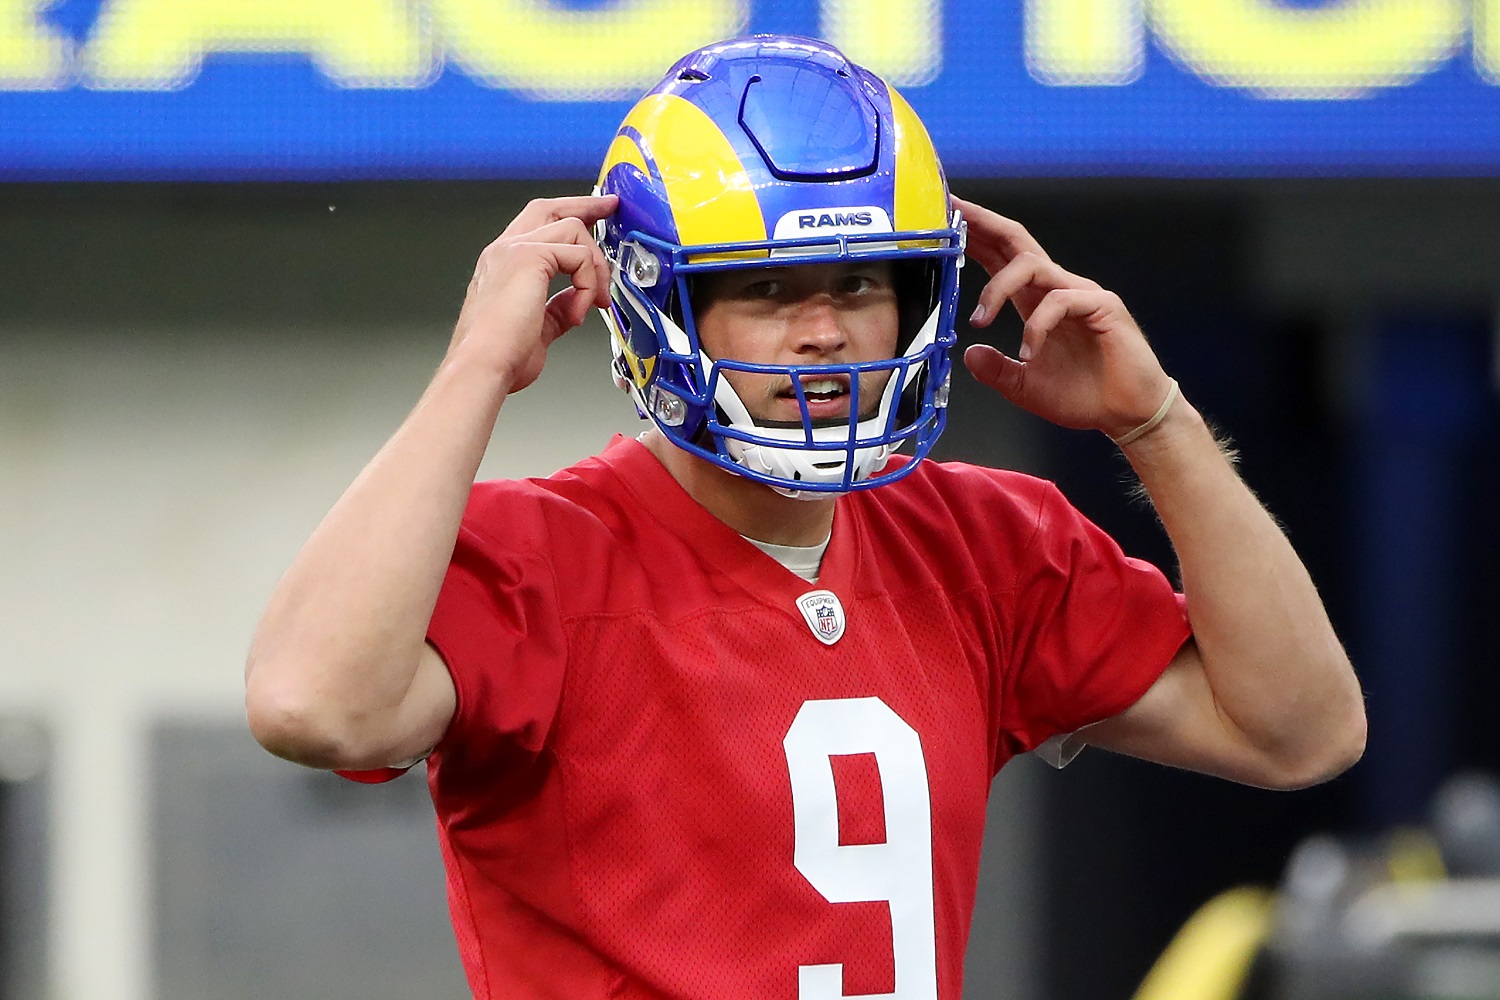 Matthew Stafford of the Los Angeles Rams calls out the play during practice at SoFi Stadium in Inglewood, California. | Katelyn Mulcahy/Getty Images